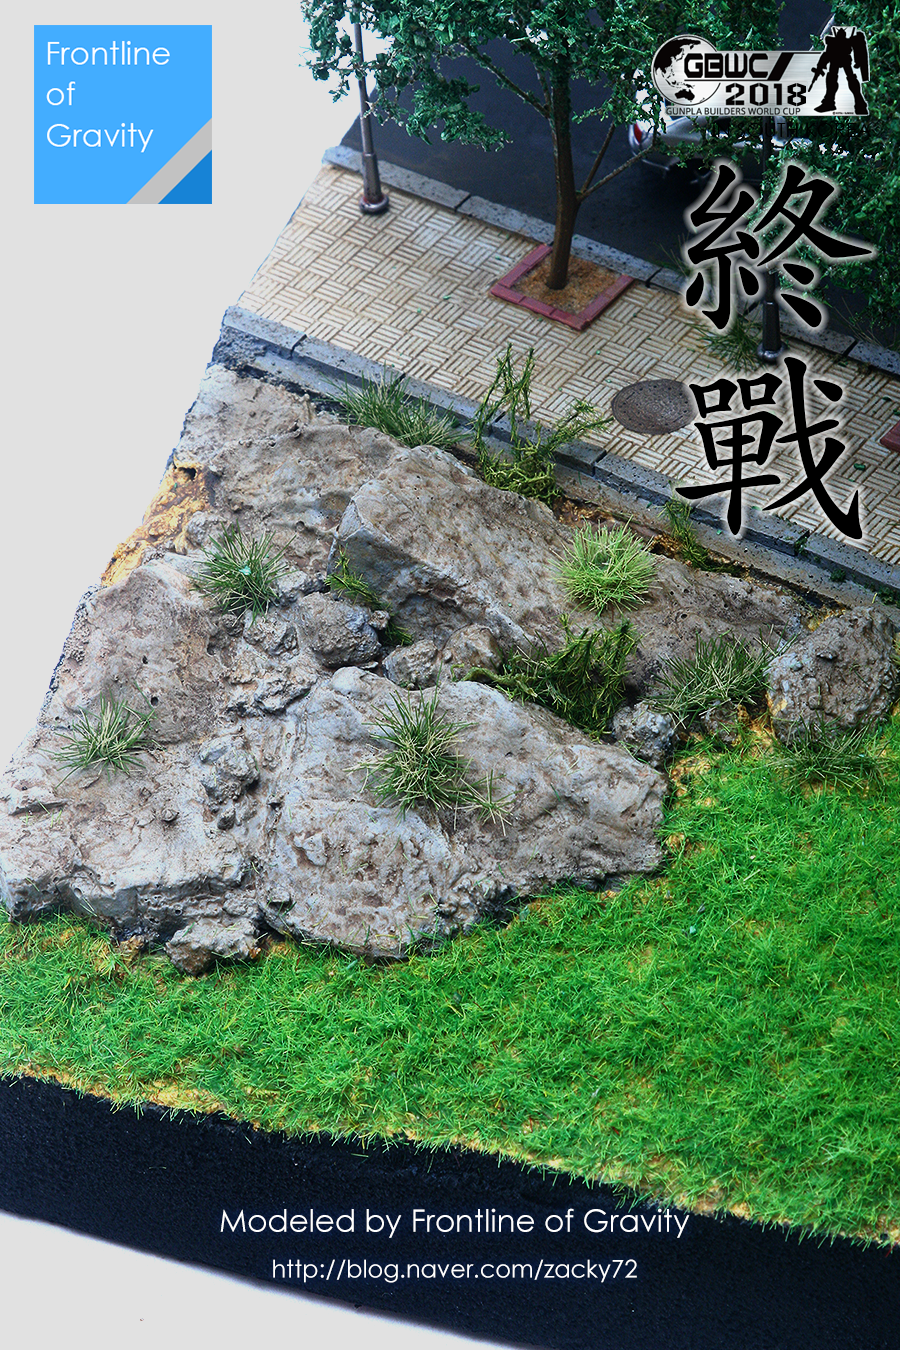 gbwc2018_fin_00009(4).png